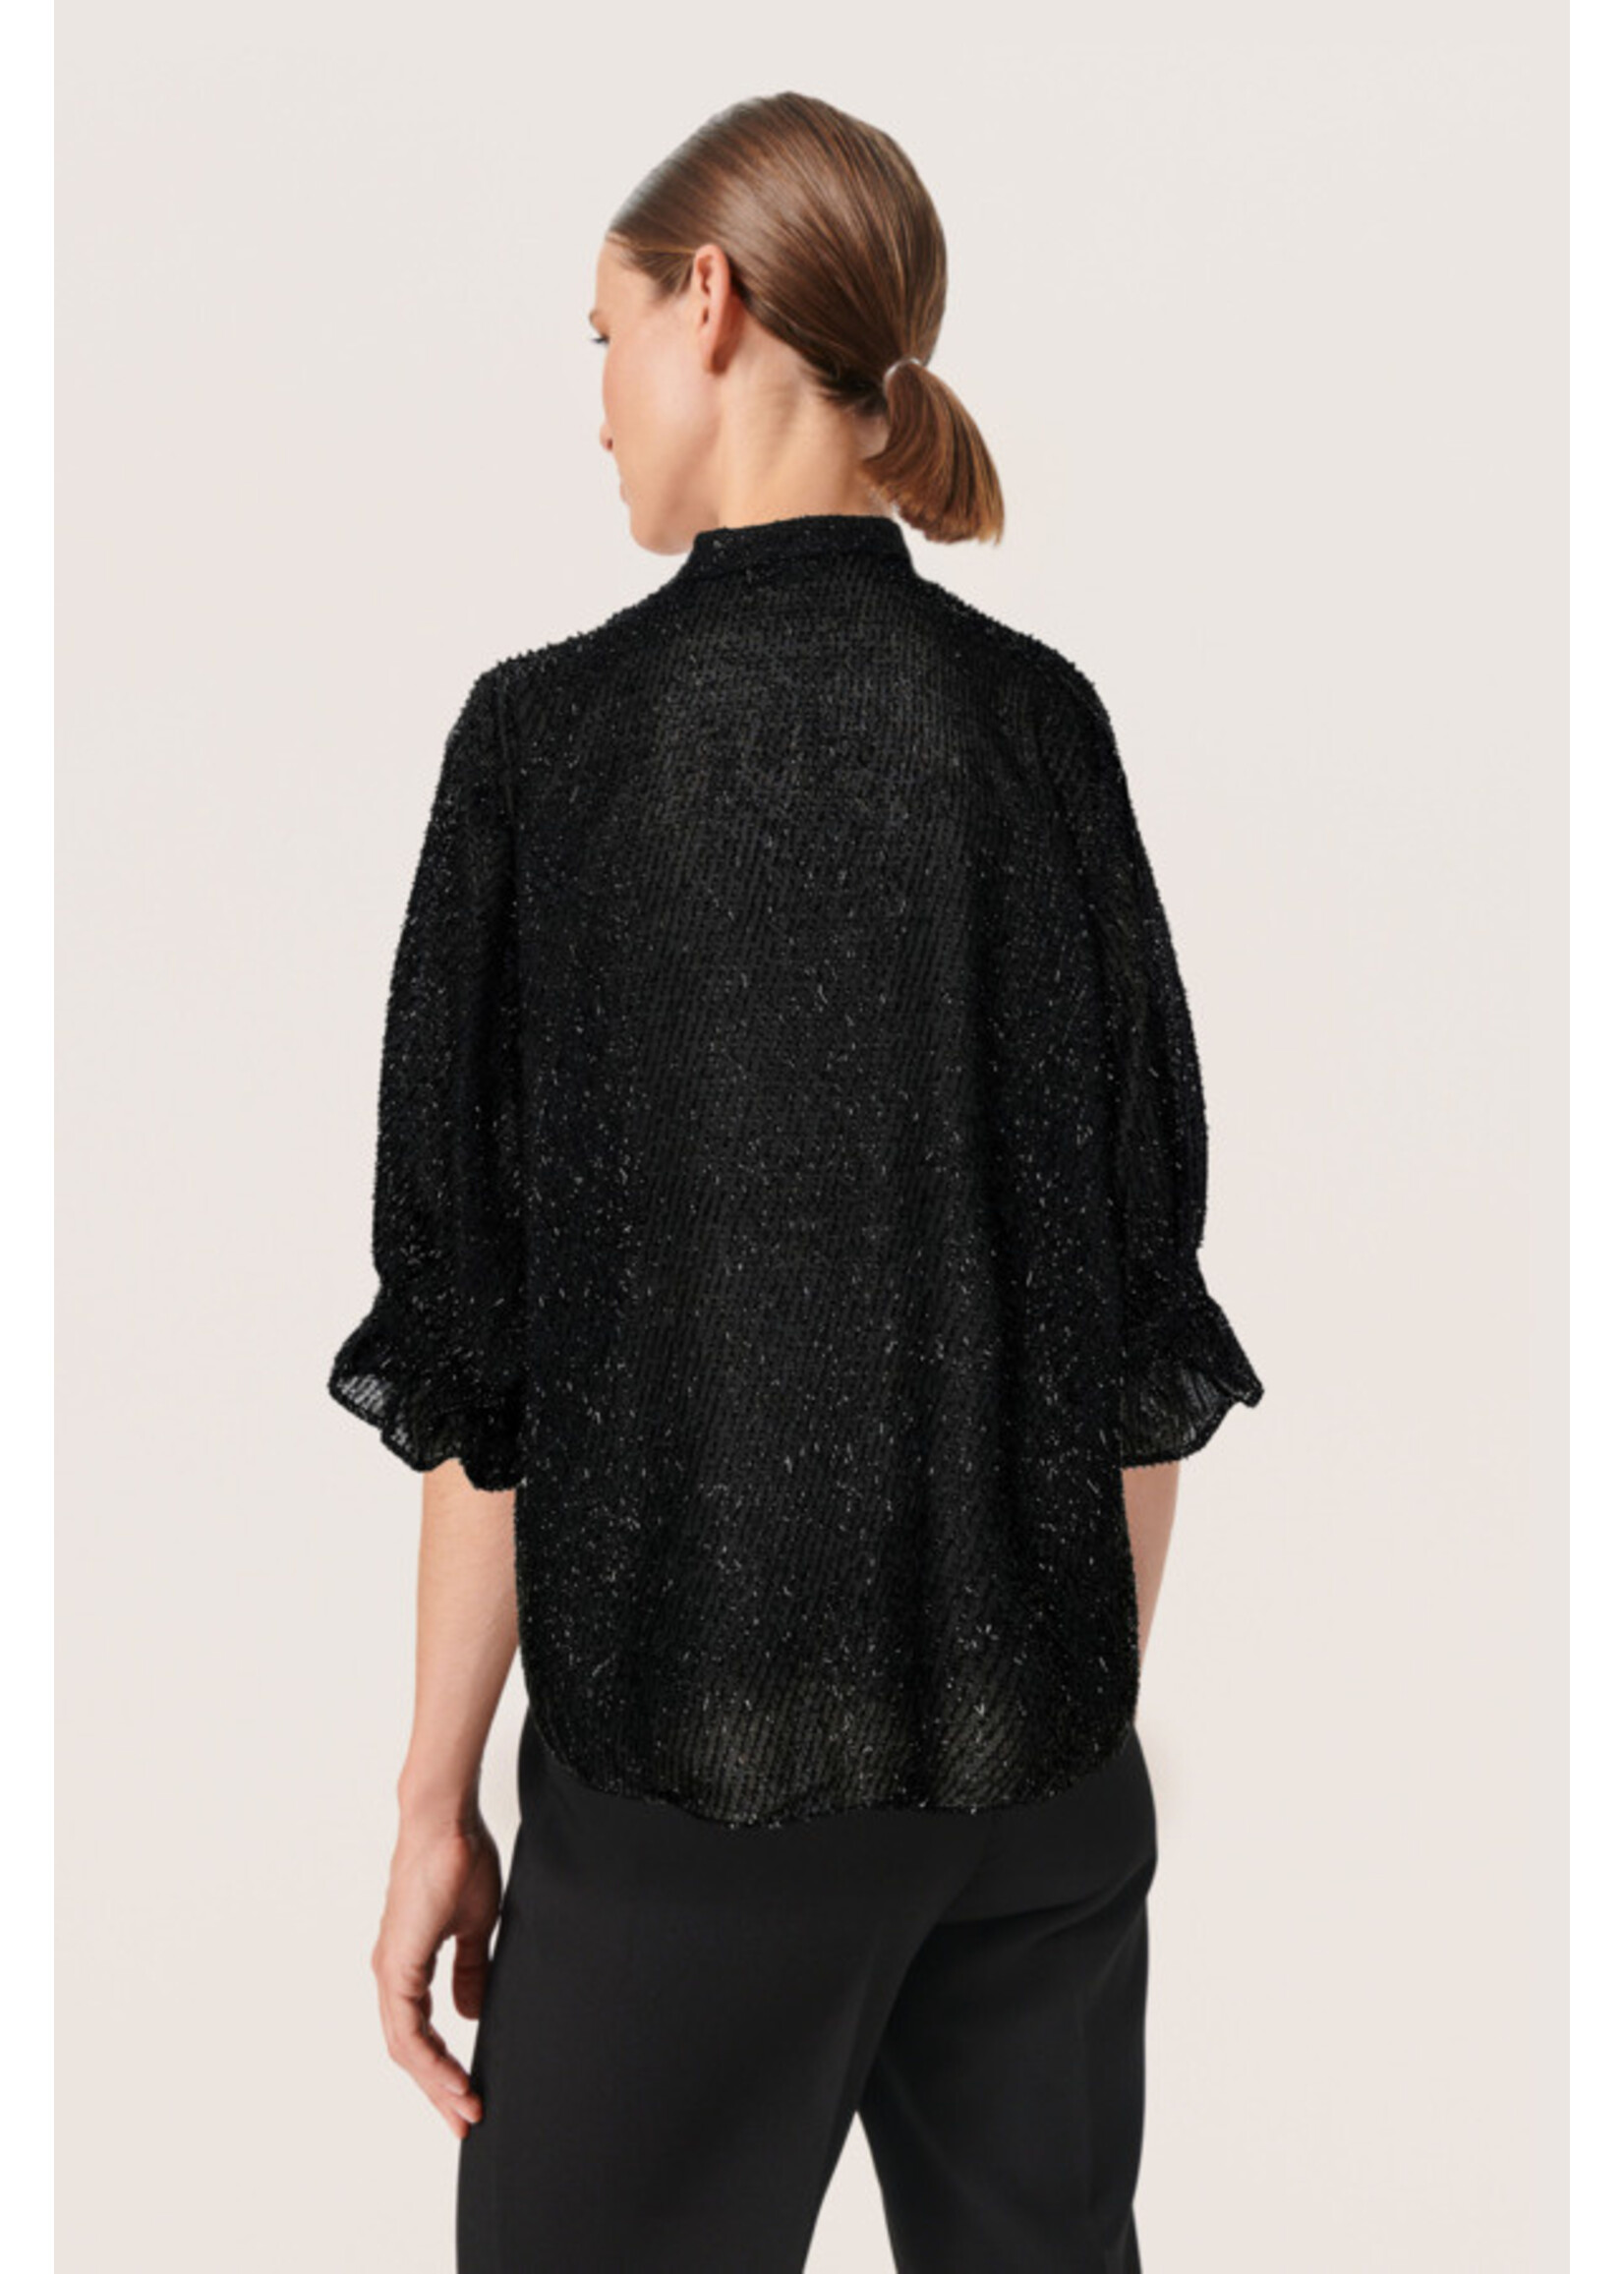 Soaked in Luxury SLLia Amily Blouse